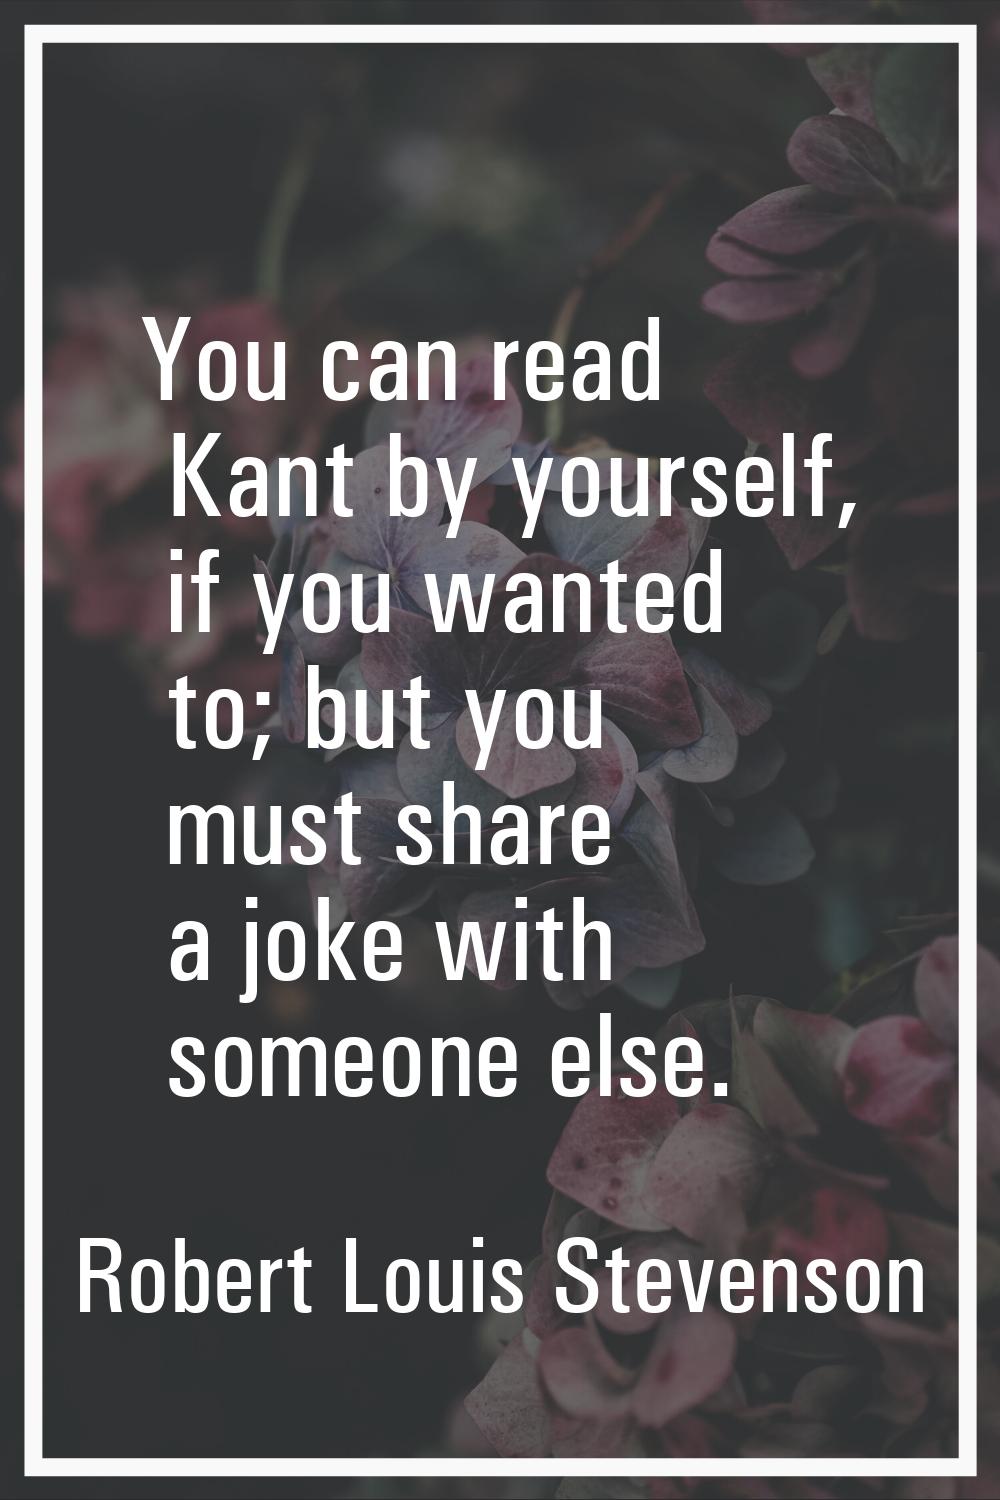 You can read Kant by yourself, if you wanted to; but you must share a joke with someone else.